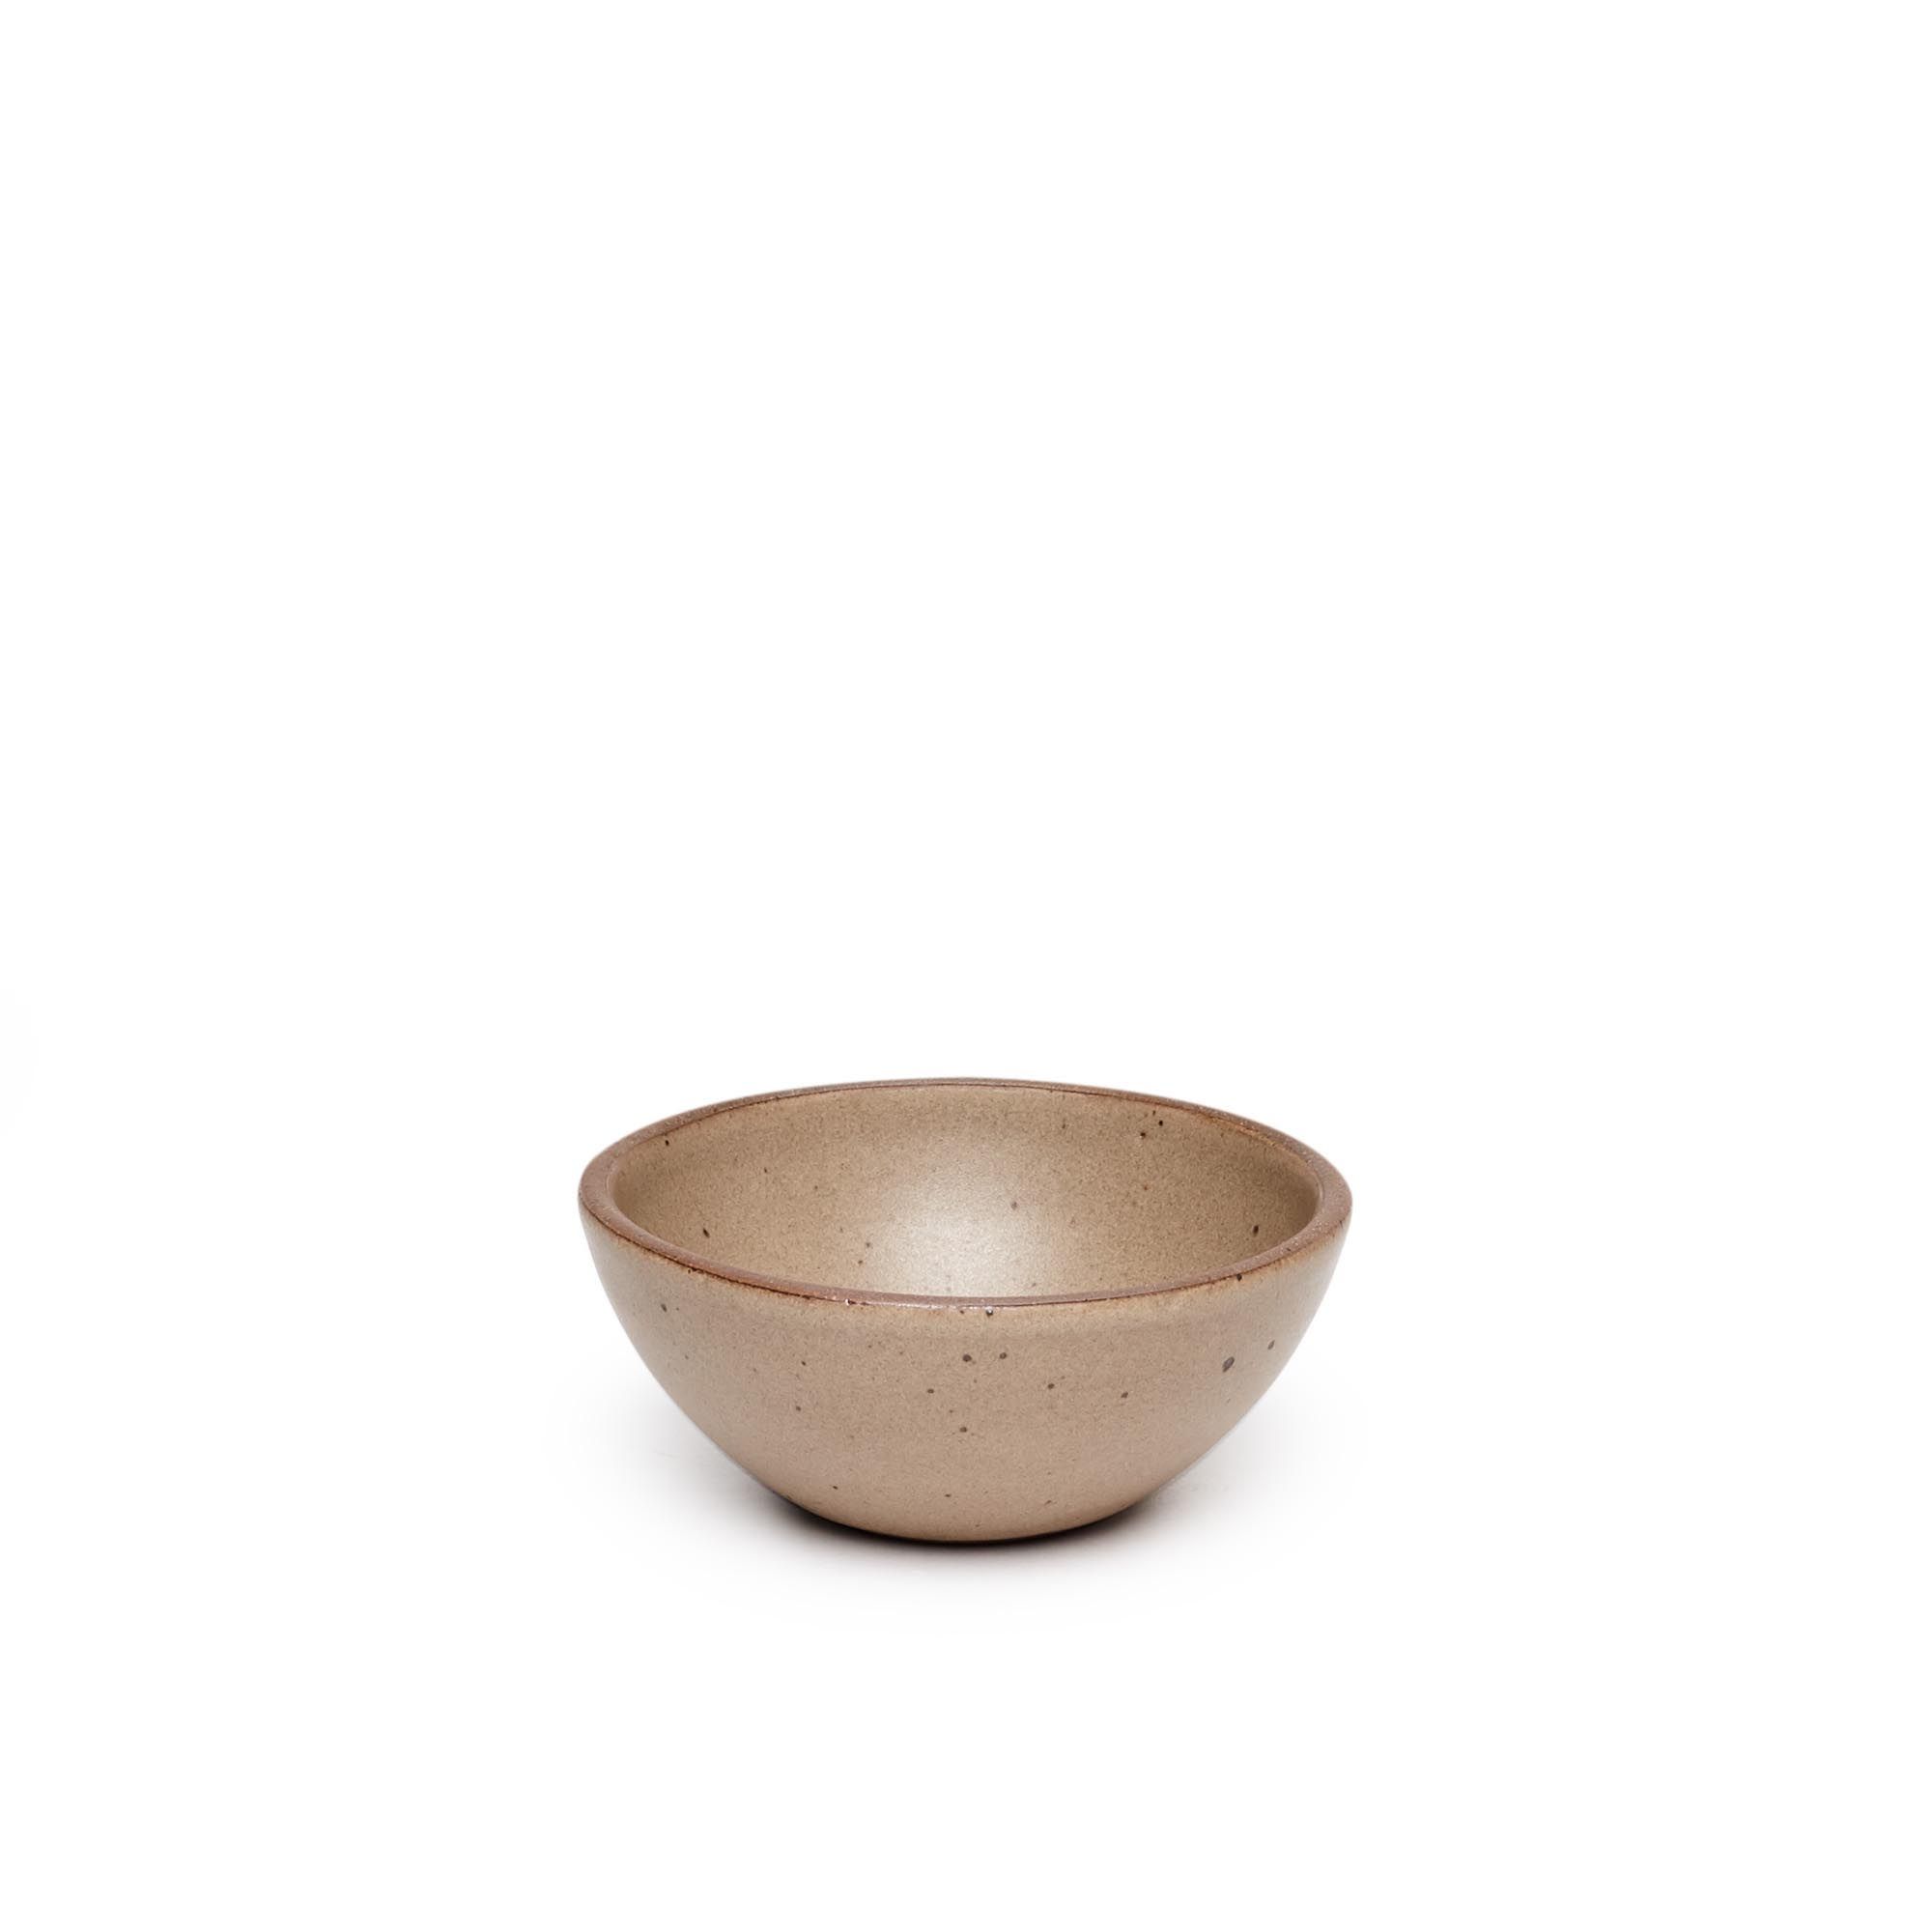 A small dessert sized rounded ceramic bowl in a warm pale brown color featuring iron speckles and an unglazed rim